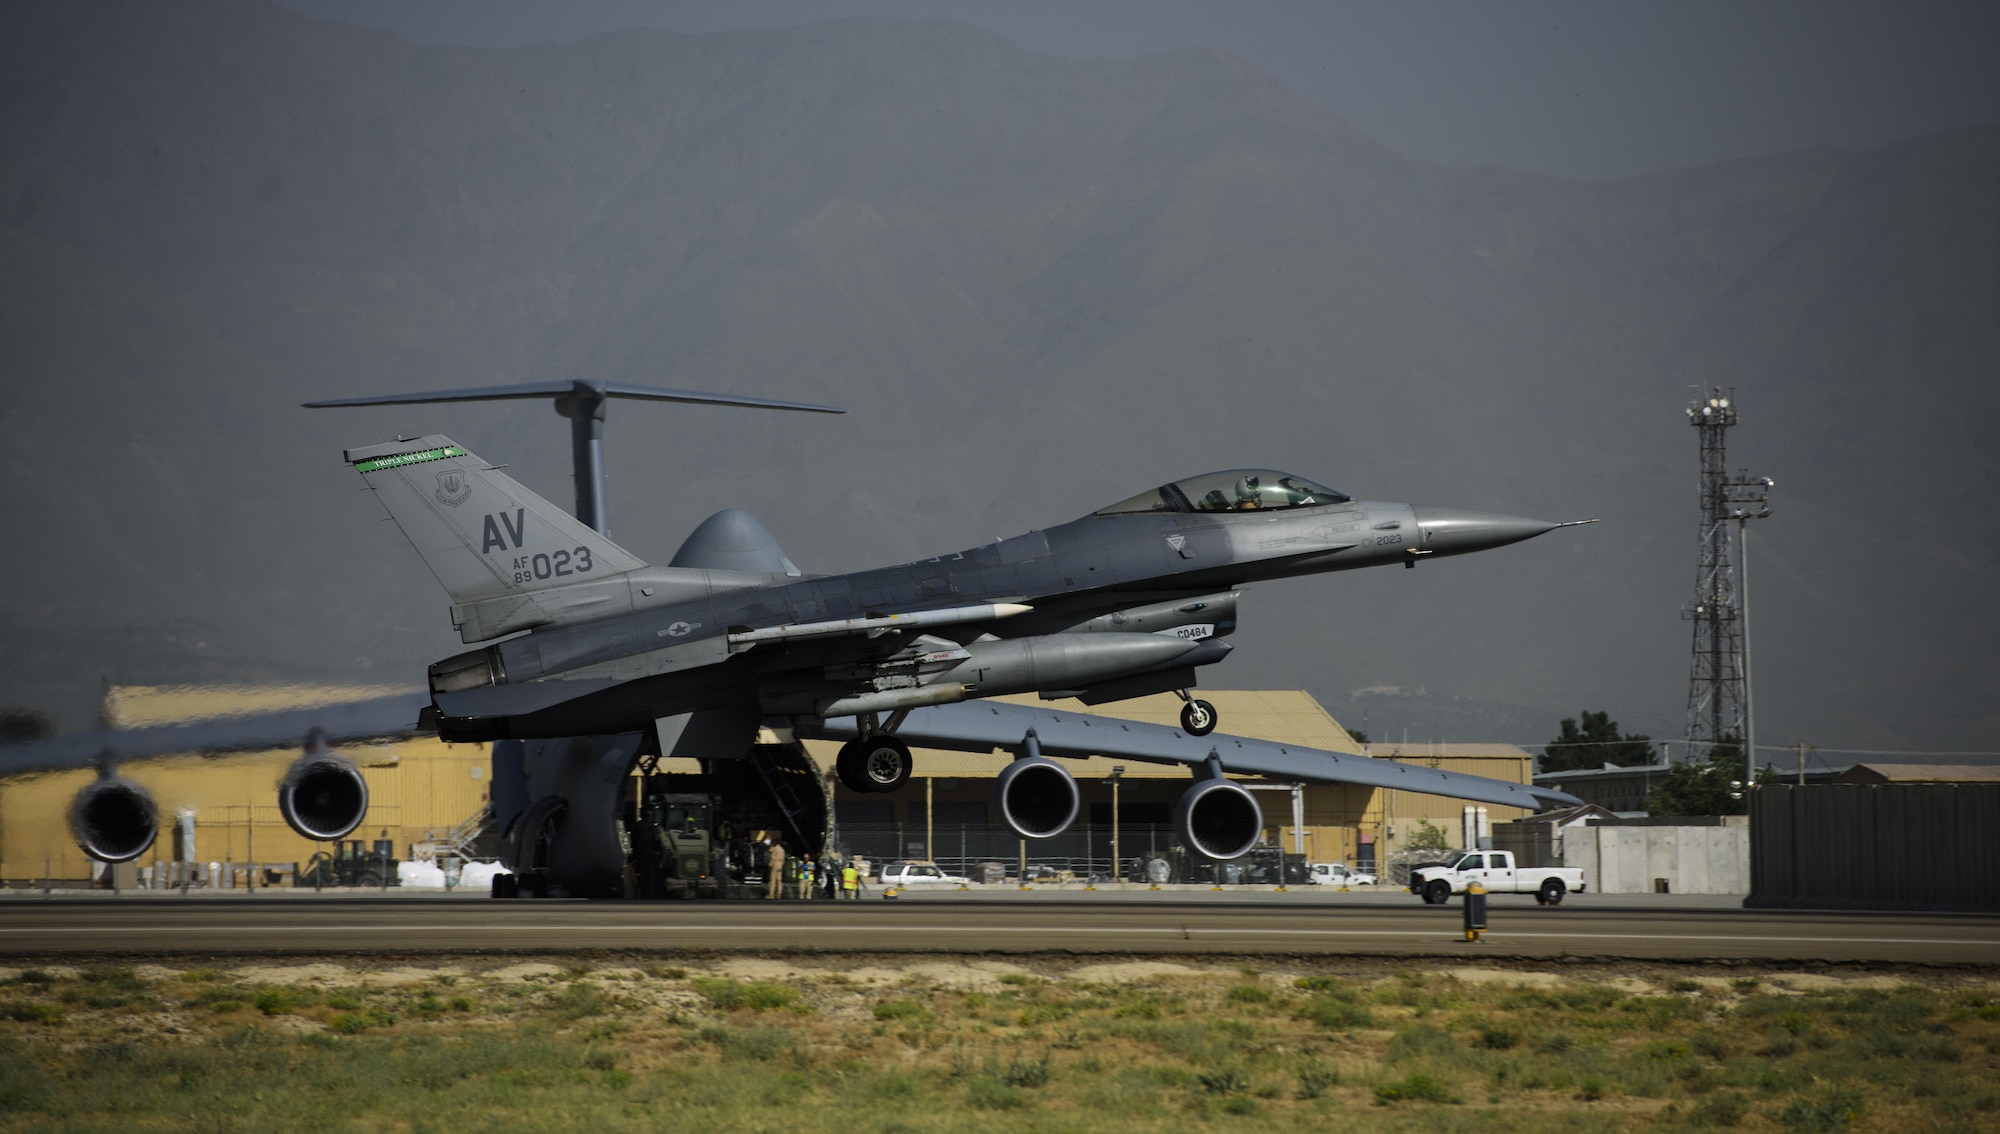 An F-16 Fighting Falcon, piloted by Brig. Gen. Jim Sears, takes off from Bagram Airfield, Afghanistan, May 22, 2017. Sears has served as the commander of the 455th Air Expeditionary Wing for the last 12 months and will soon depart Afghanistan to continue his Air Force career. During the flight, Sears patrolled the skies with his wingman, engaging enemy ground forces from above to support coalition and Afghan troops. (U.S. Air Force photo by Staff Sgt. Benjamin Gonsier)